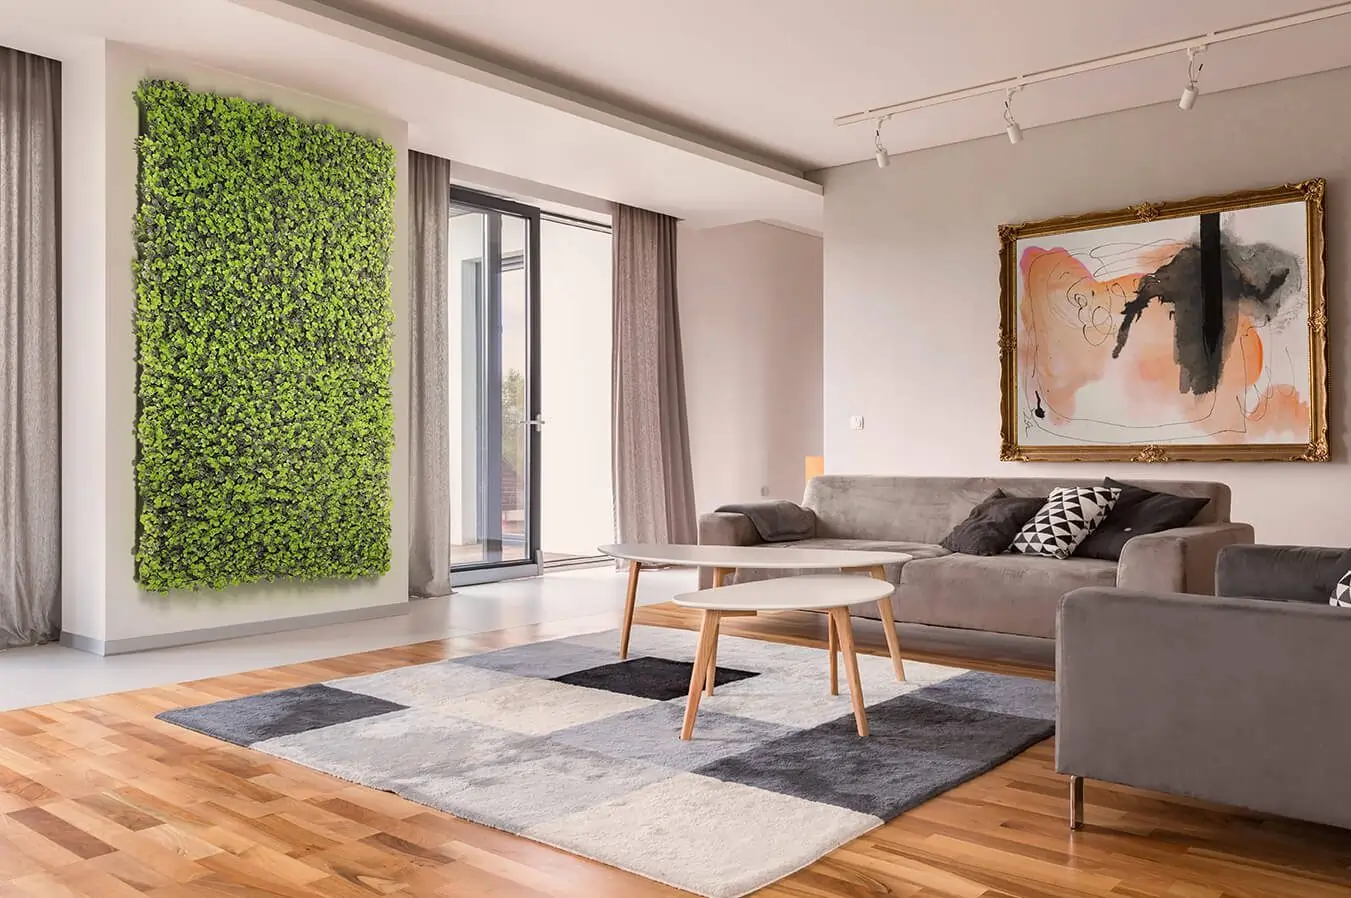 Artificial living wall installed in residential living room